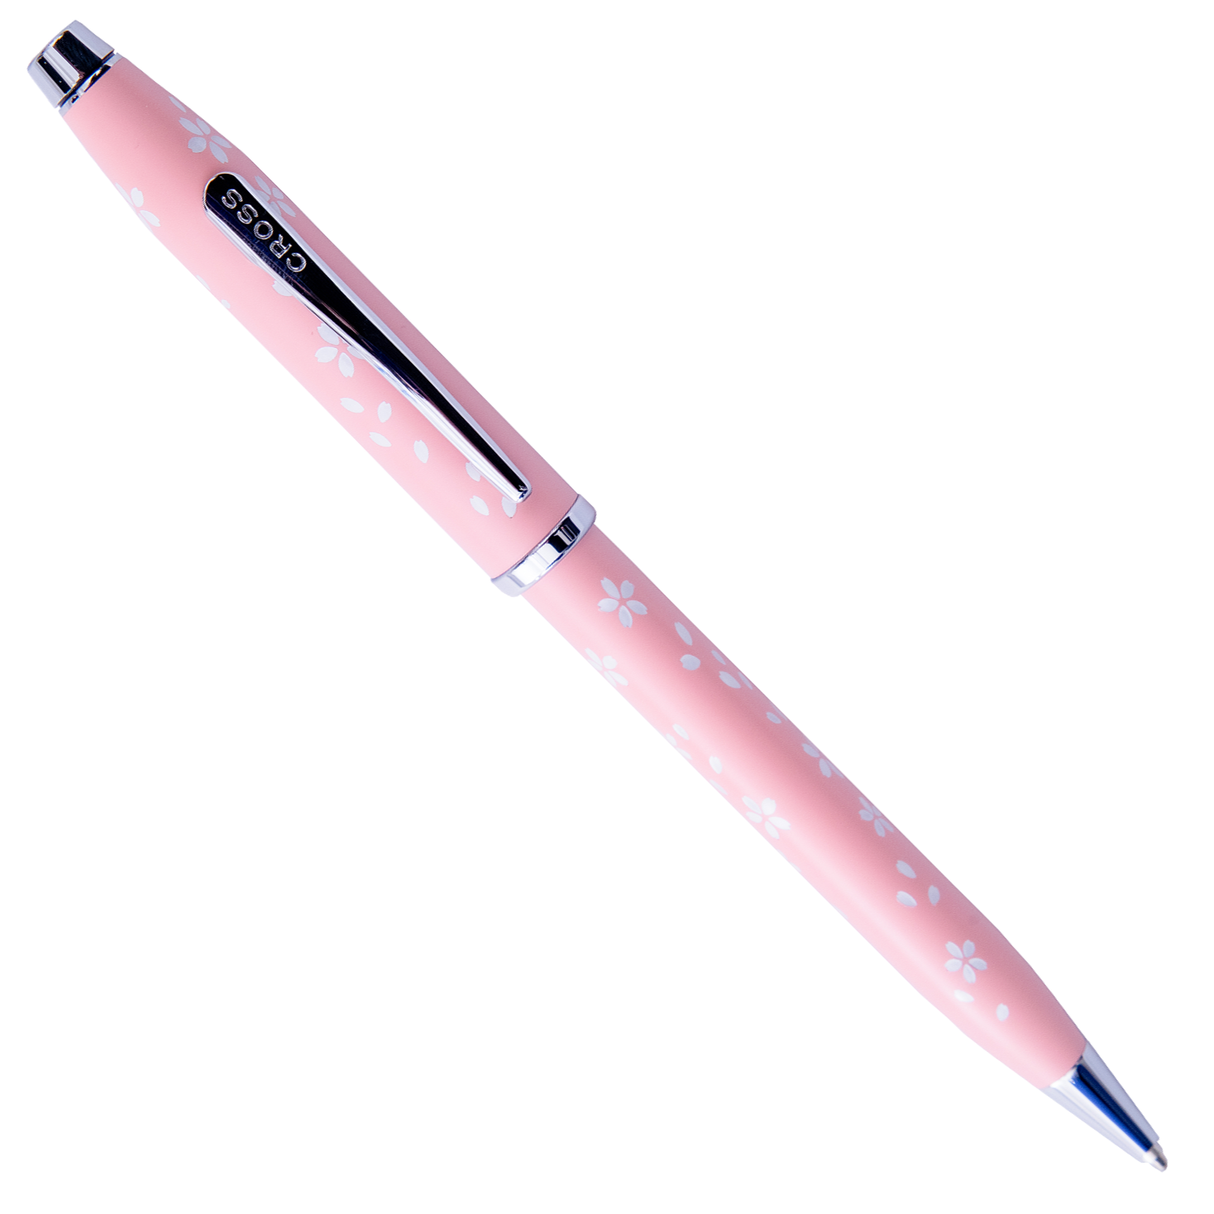 Cross Century II Cherry Blossom Pink Lacquer with Chrome - Ballpoint